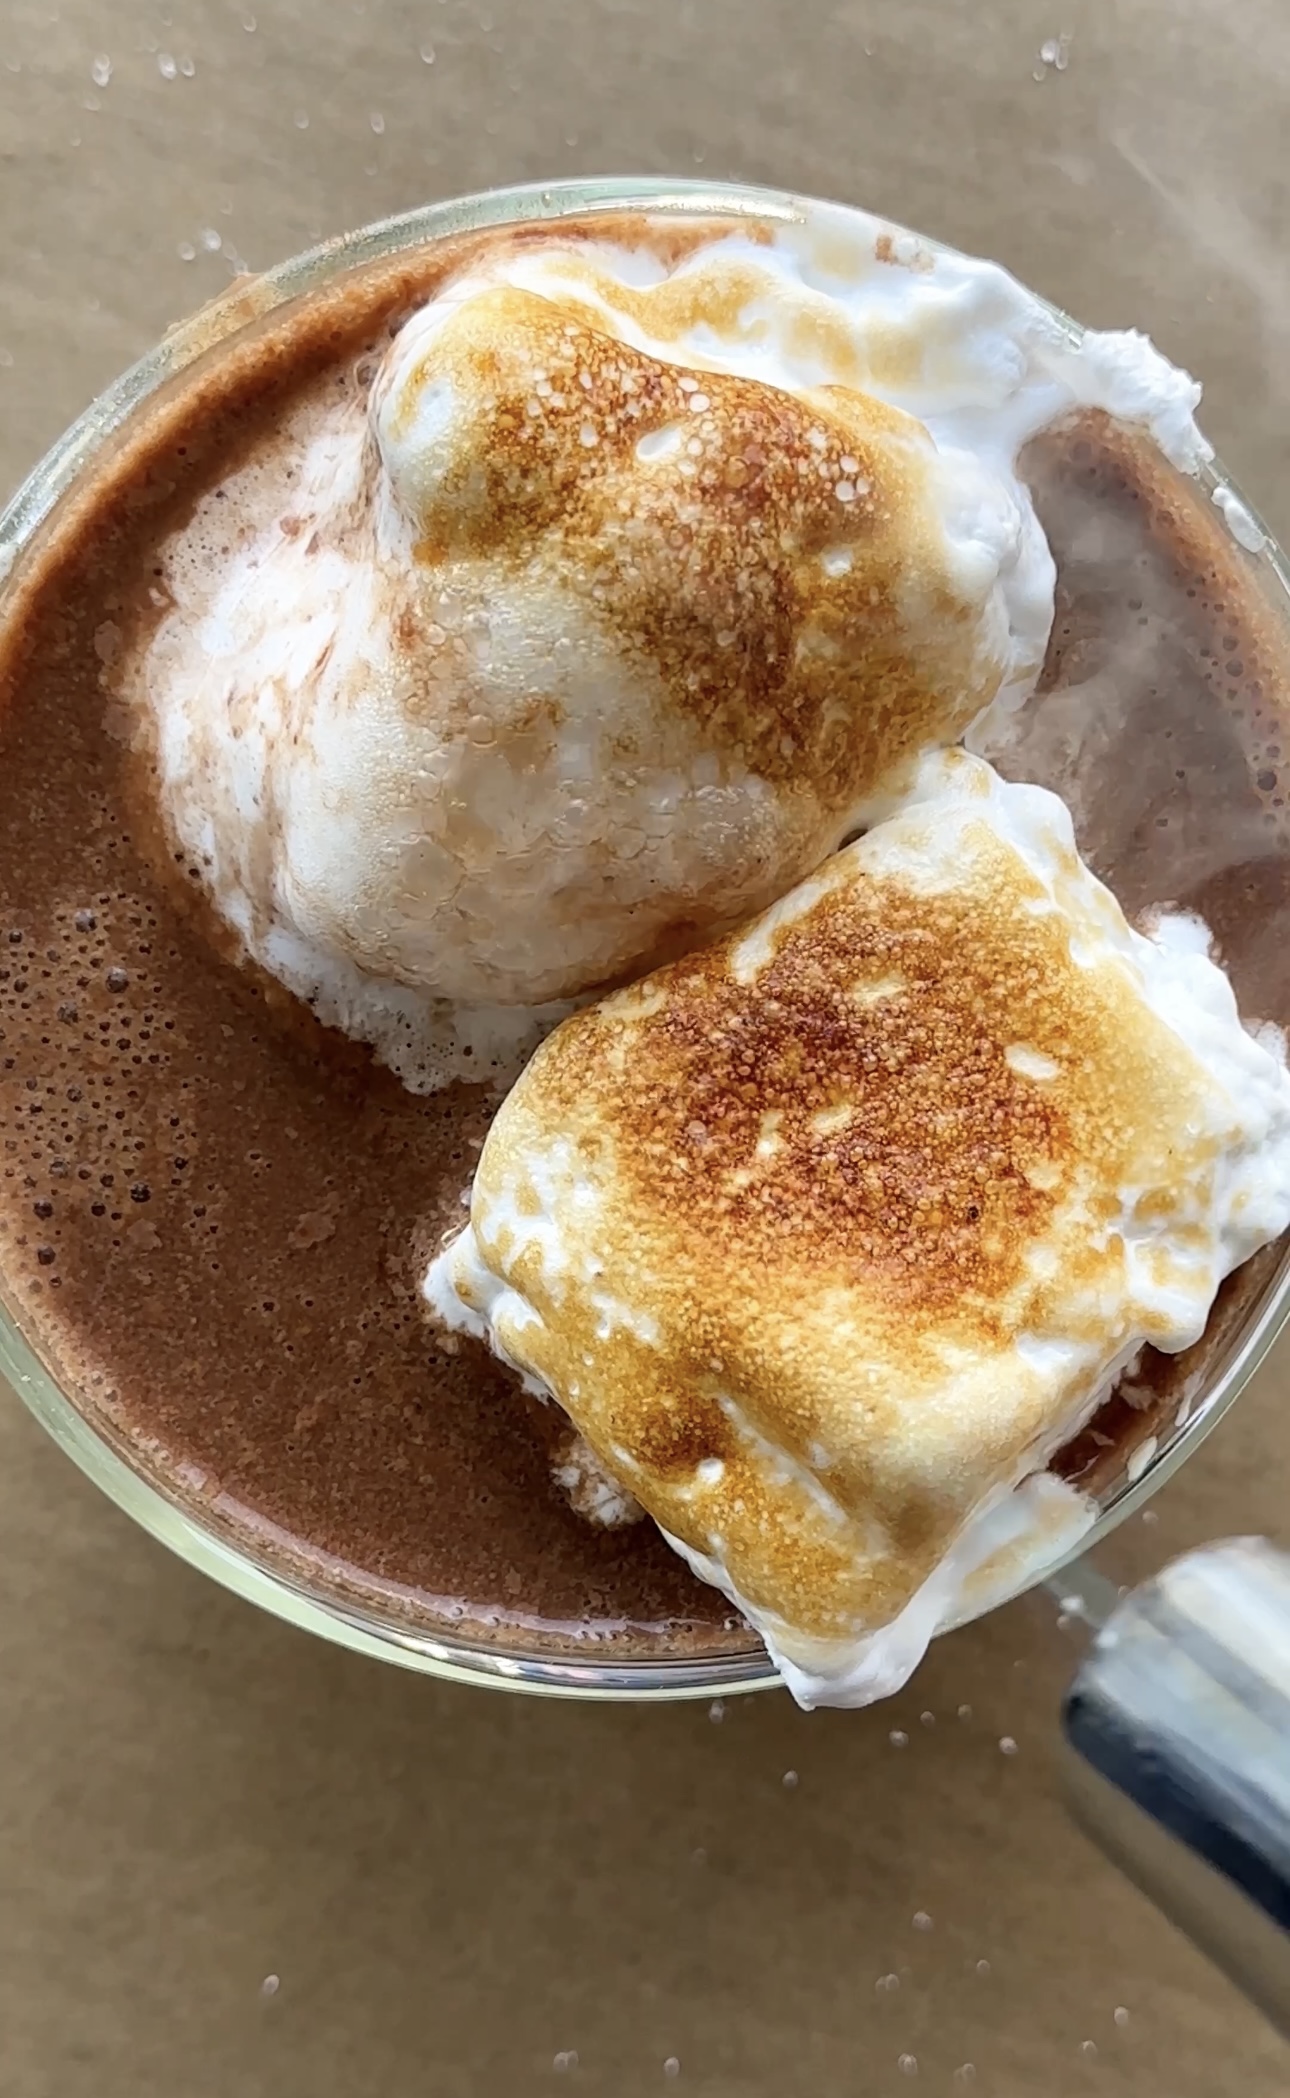 Homemade Marshmallows 101: Essential Tips and Tricks for Success